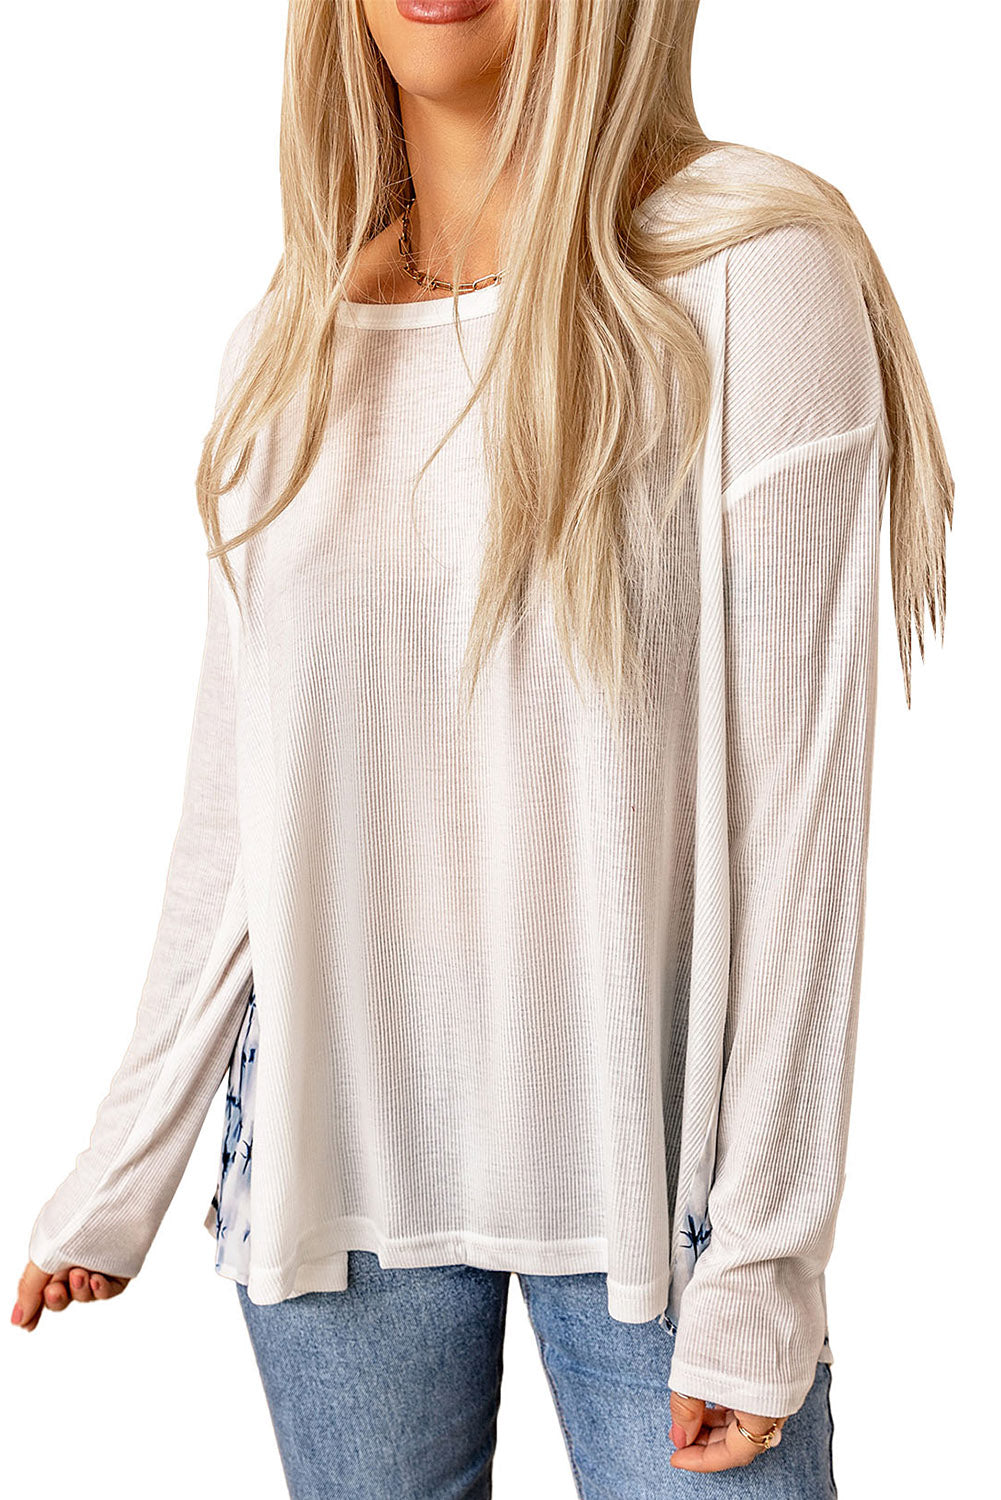 White Geometric Tie Dye Ribbed Loose Fit Long Sleeve Top Long Sleeve Tops JT's Designer Fashion